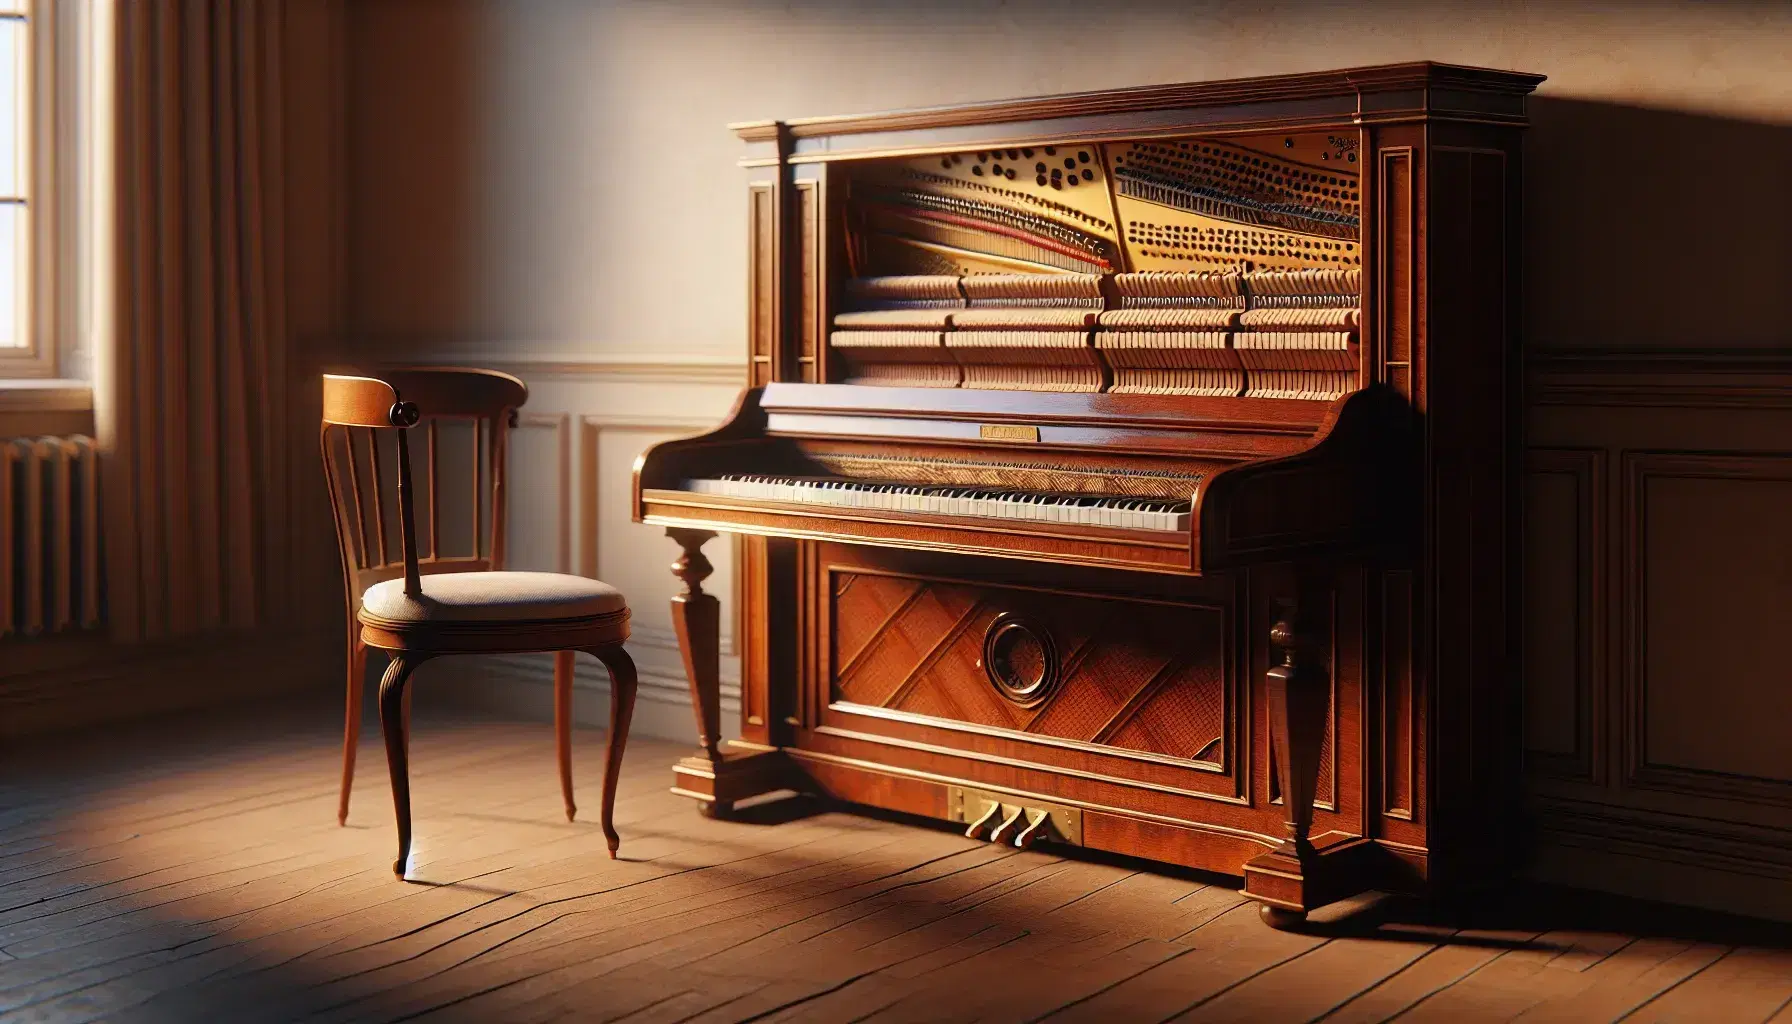 Vintage upright mahogany piano with open lid showing strings and hammers, paired with a polished wooden chair in a warmly lit, cream-colored room.